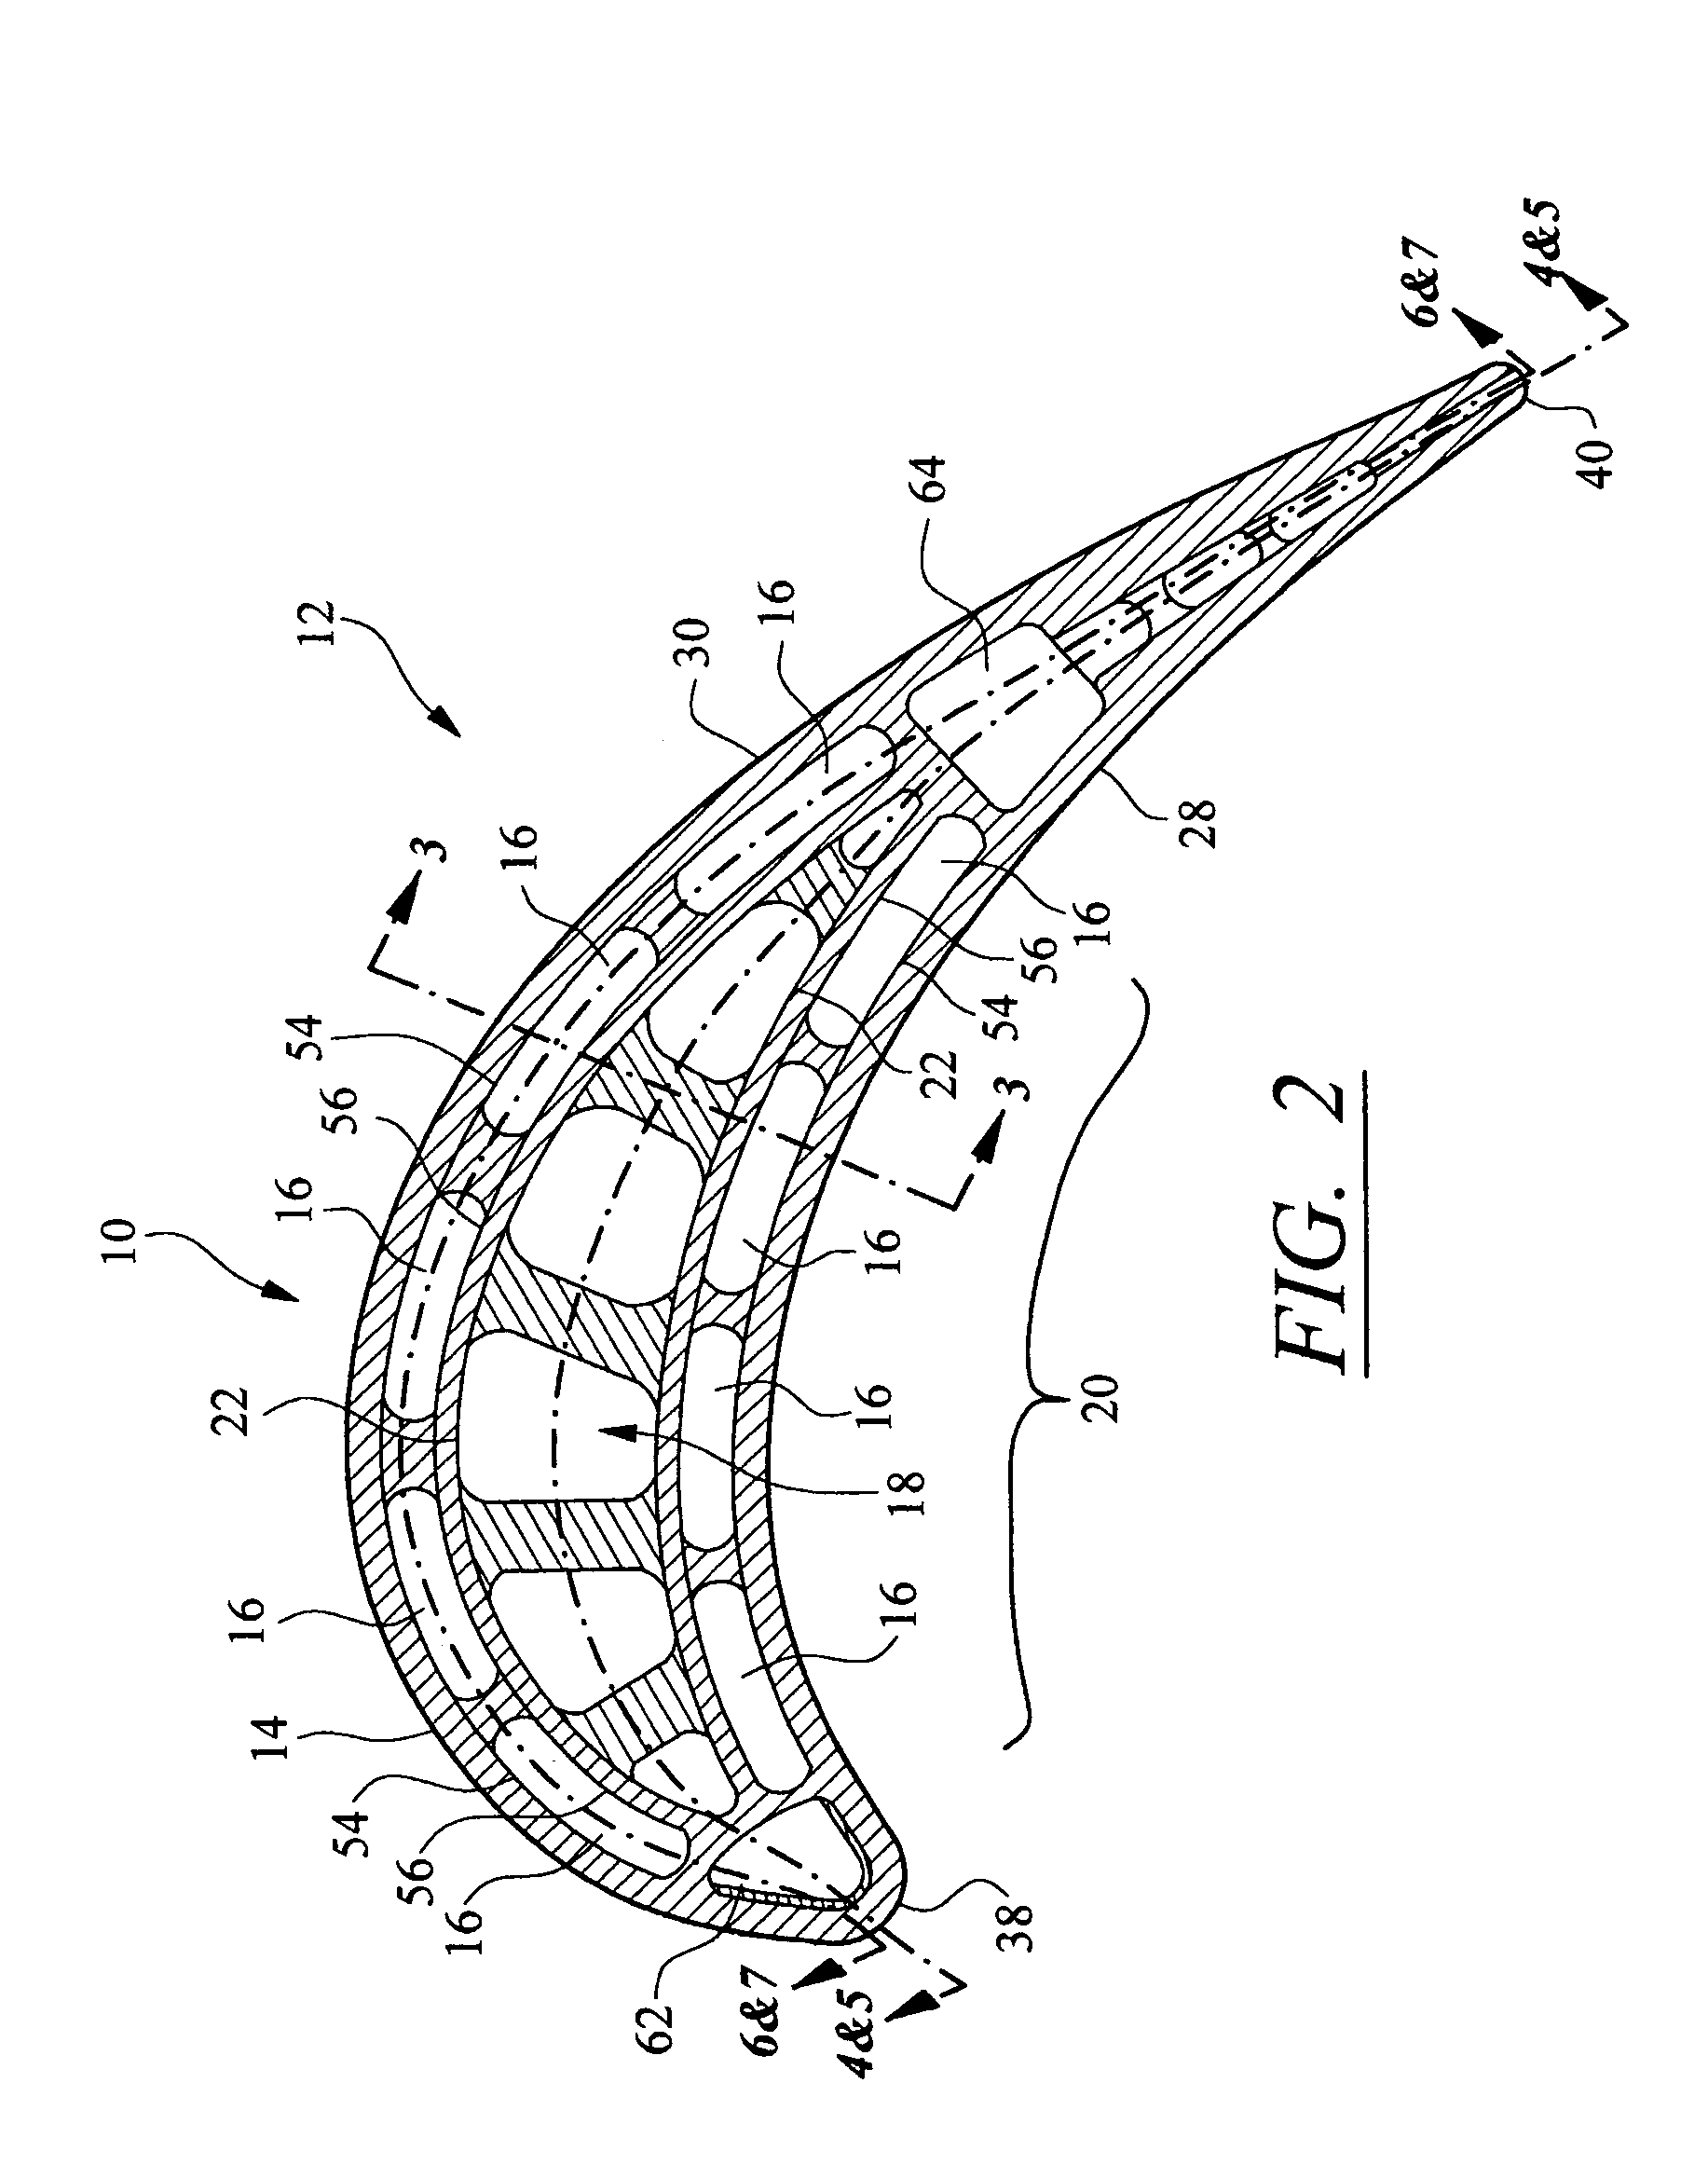 Turbine airfoil with outer wall cooling system and inner mid-chord hot gas receiving cavity